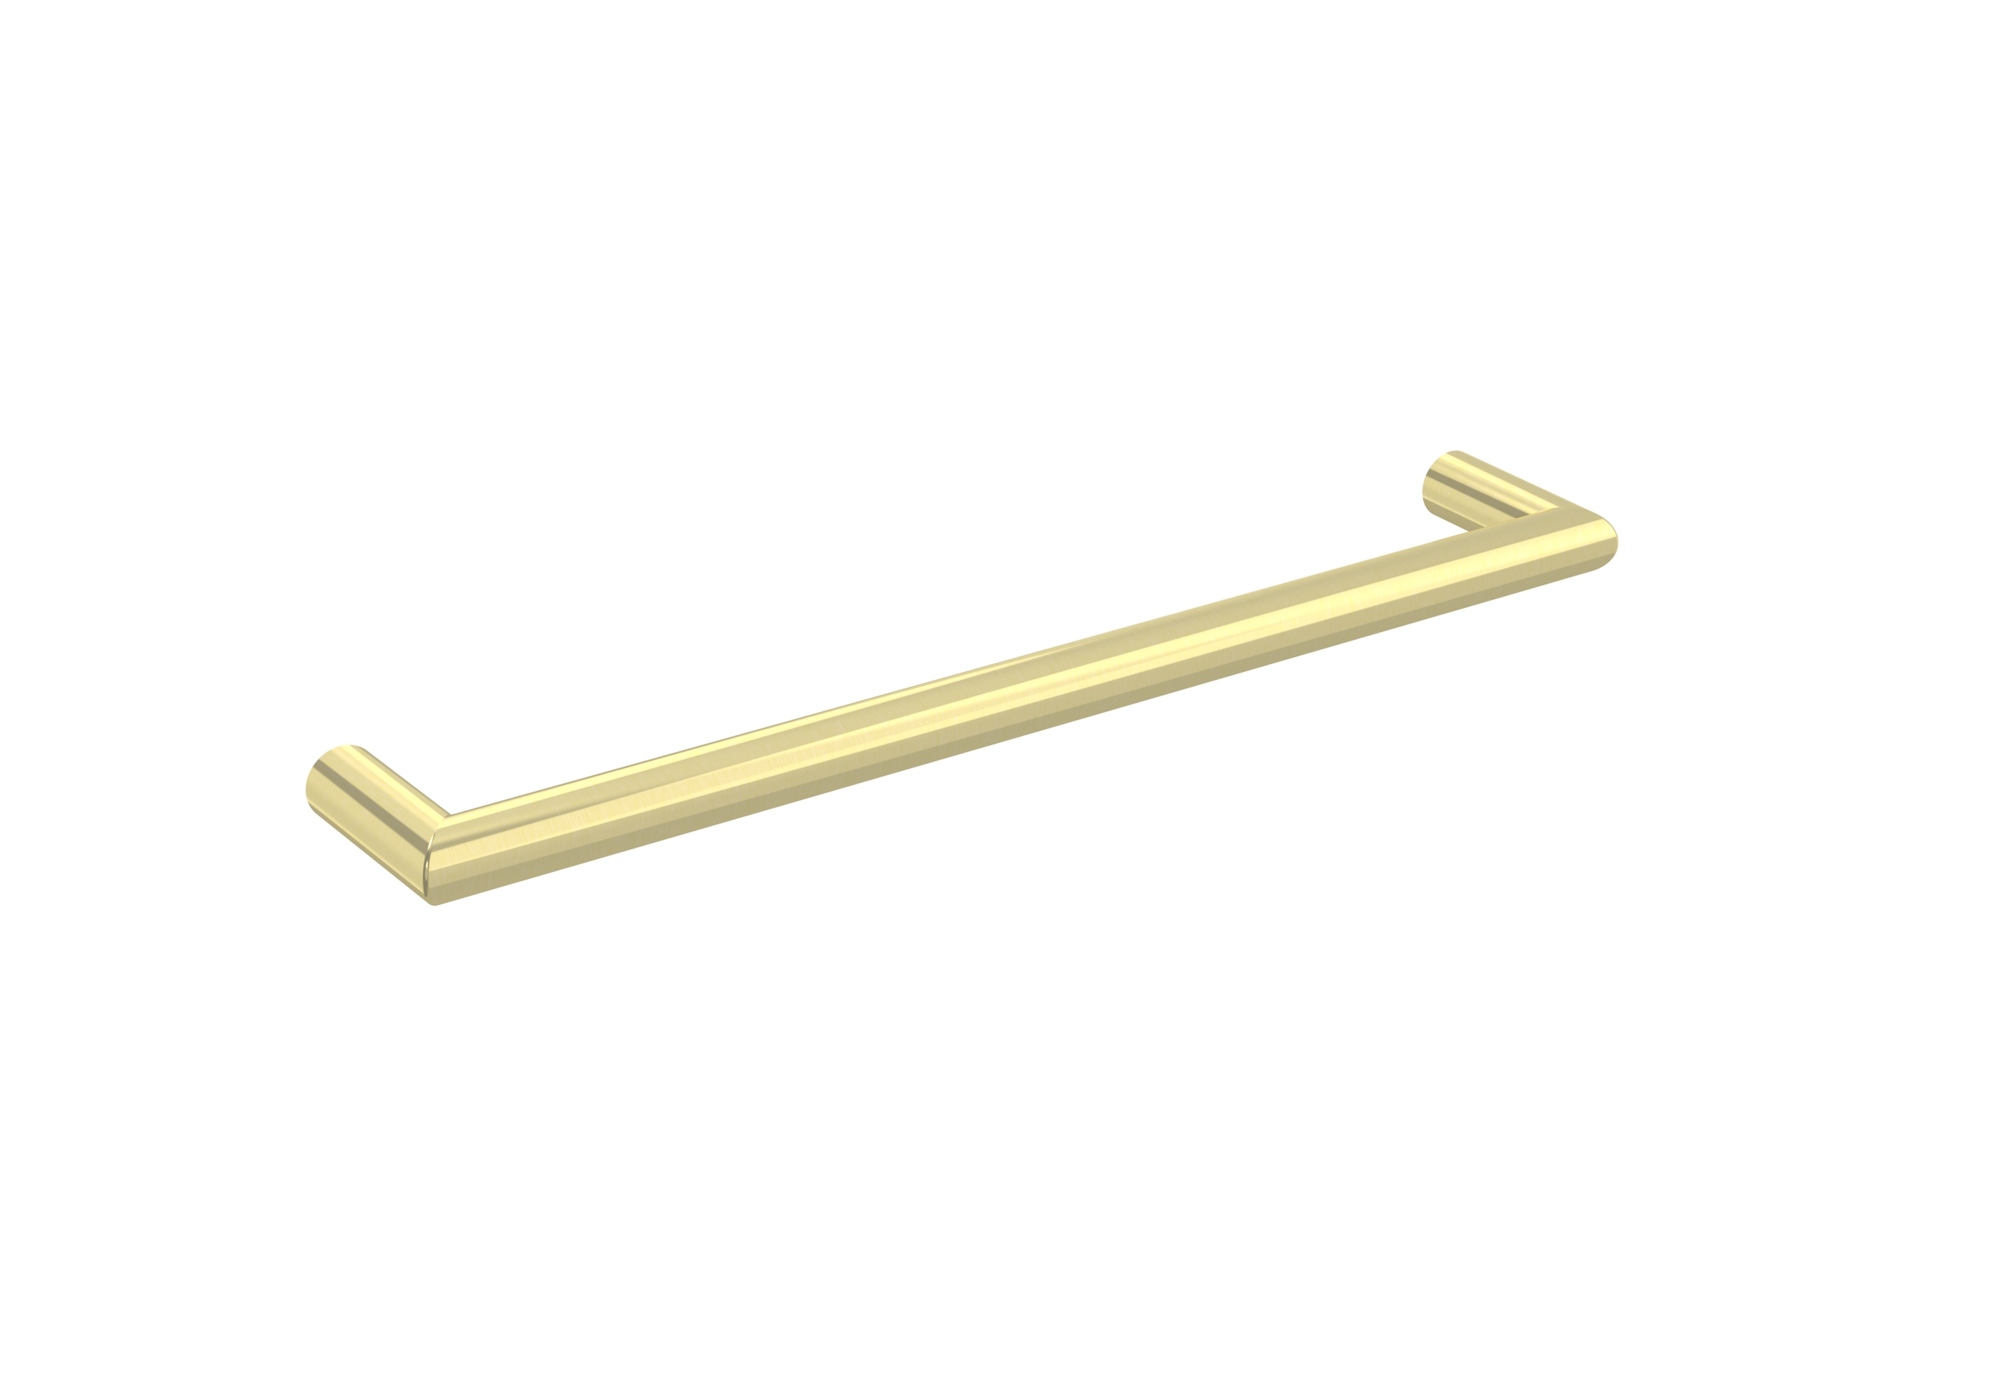 EMBER 600mm round electric towel rail - 12V - Brushed Brass